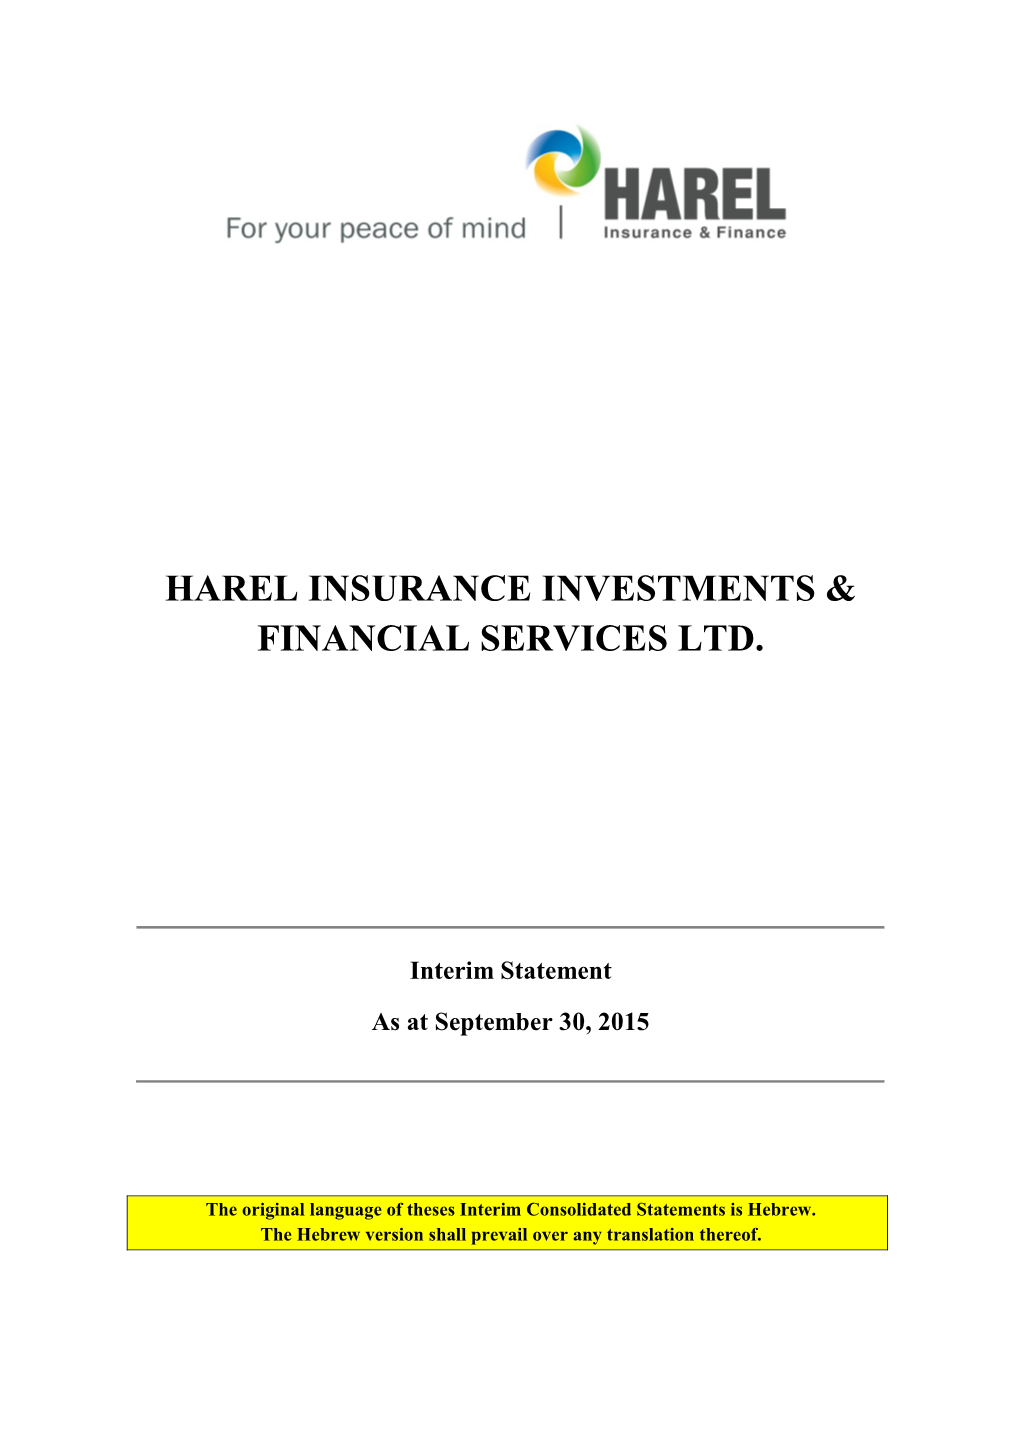 Harel Insurance Investments and Financial Services Ltd